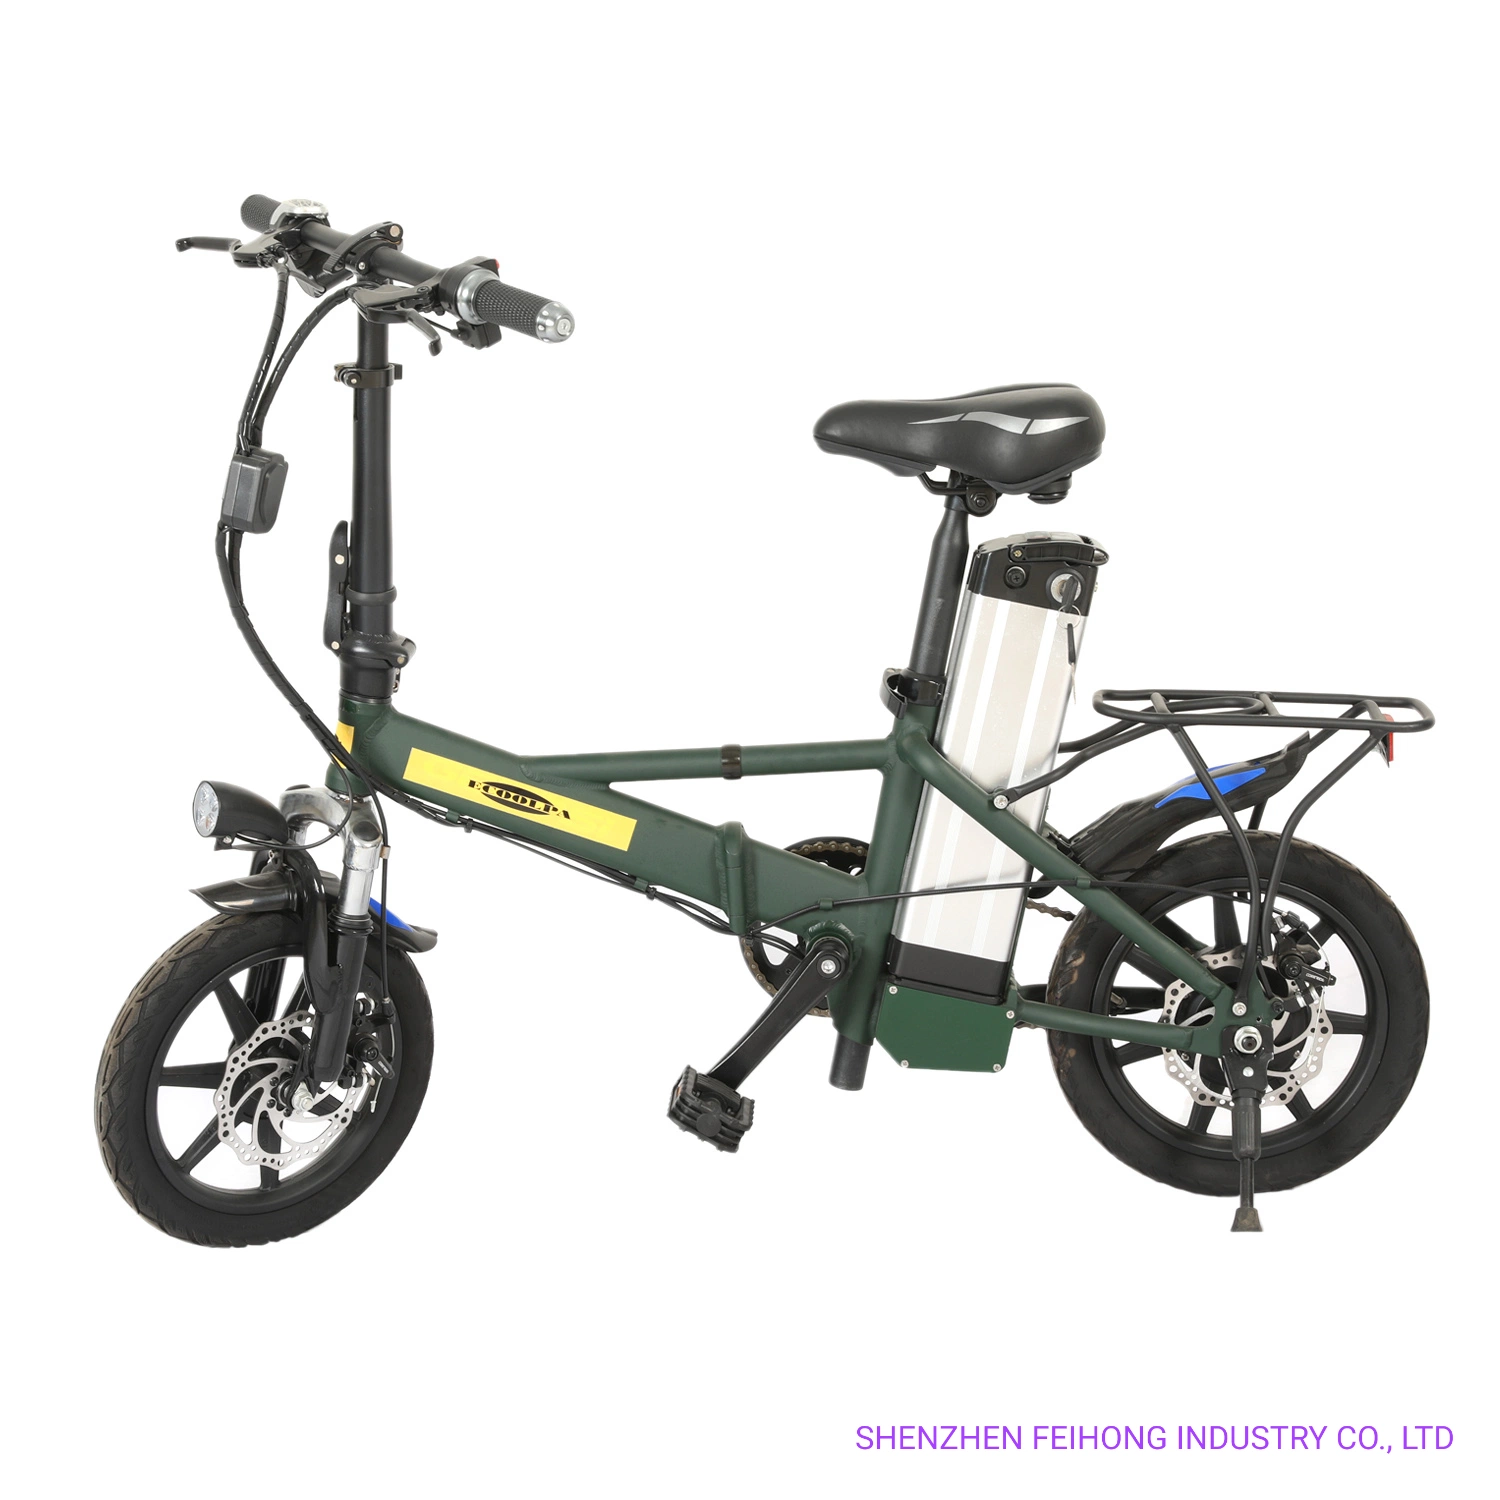 Motorcycle Electric Scooter Bicycle Electric Bike Electric Motorcycle Scooter Motor Scooter Road Bike Hybrid Bicycle Bike 48V 12ah Battery Electric Road Bike